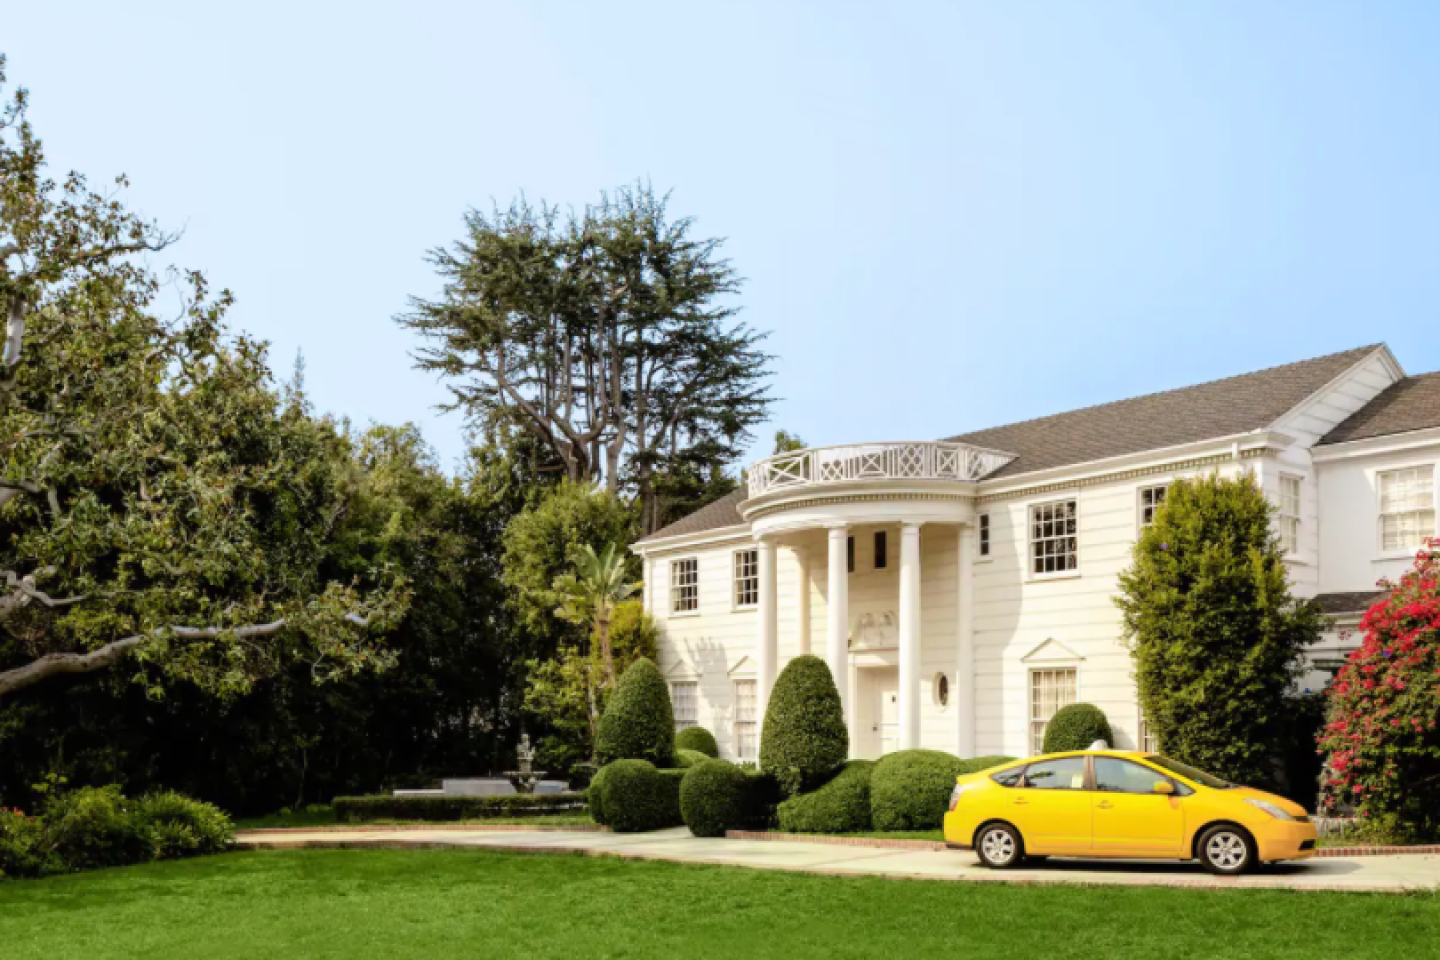 'Fresh Prince of Bel-Air' mansion: the Brentwood home